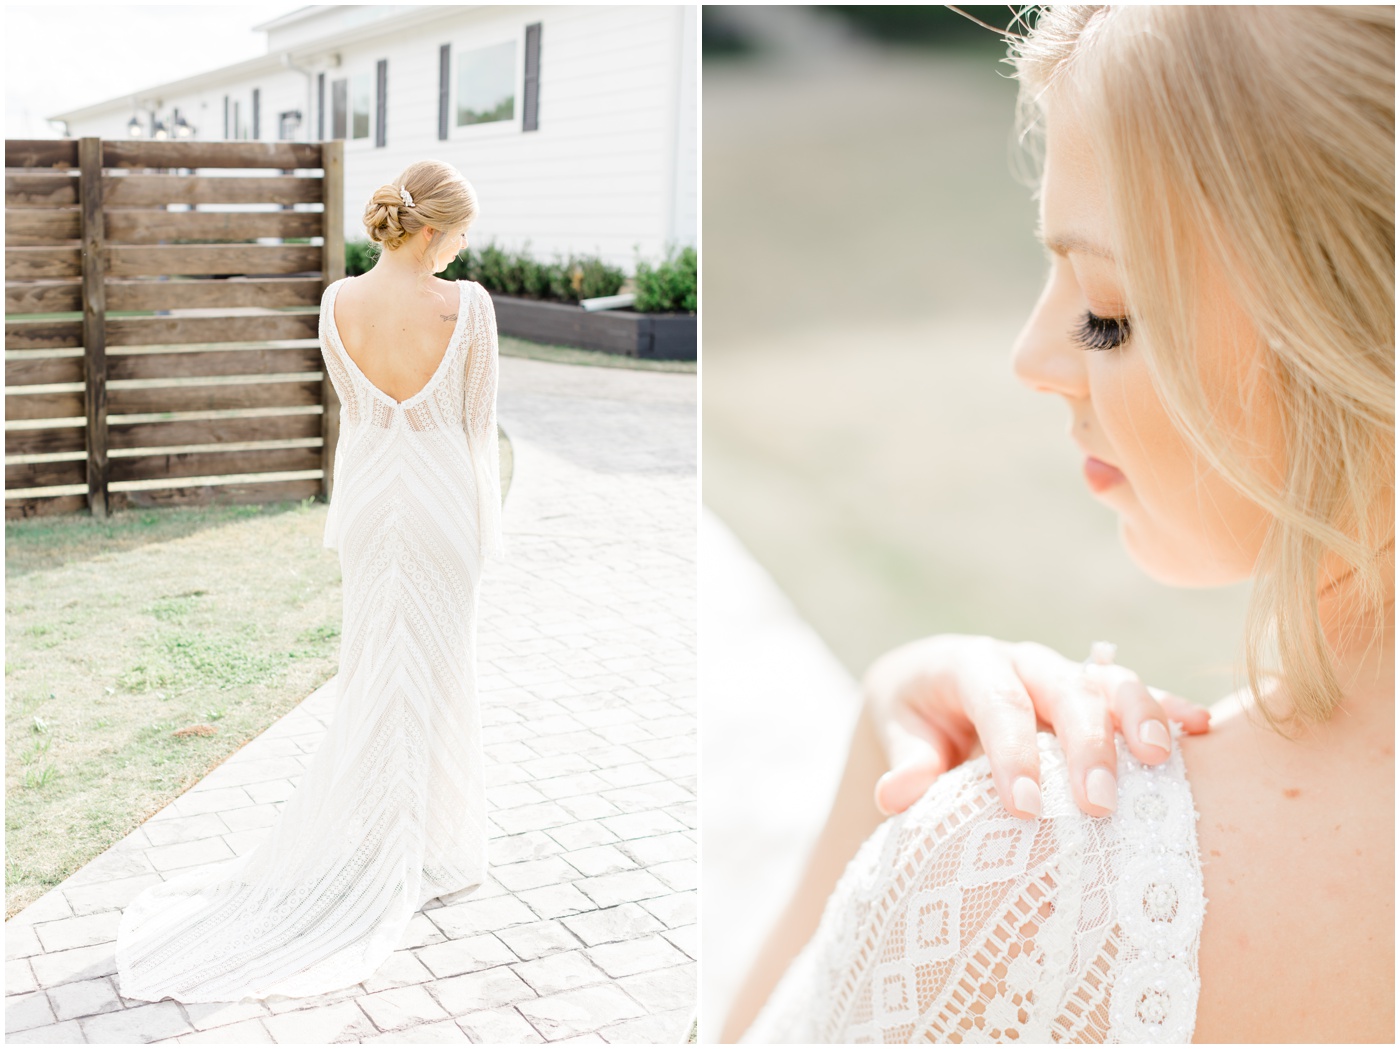 Houston bridal session | details of the brides hair, makeup, and wedding dress